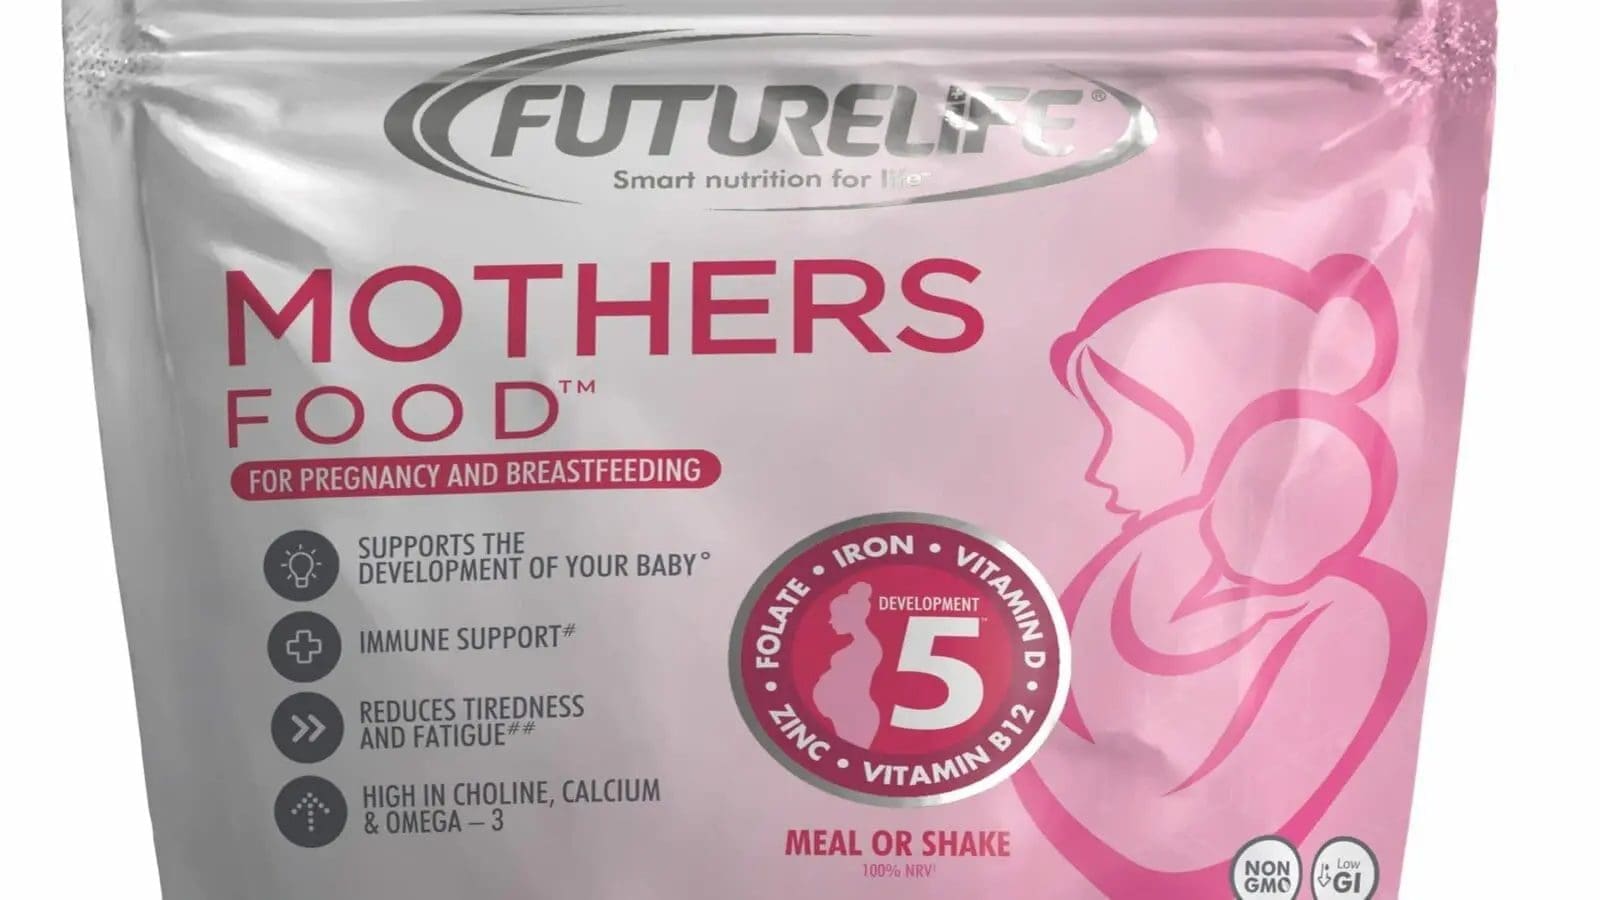 Futurelife launches Futurelife Mothers Food to provide optimal nutrition for expectant, lactating mothers